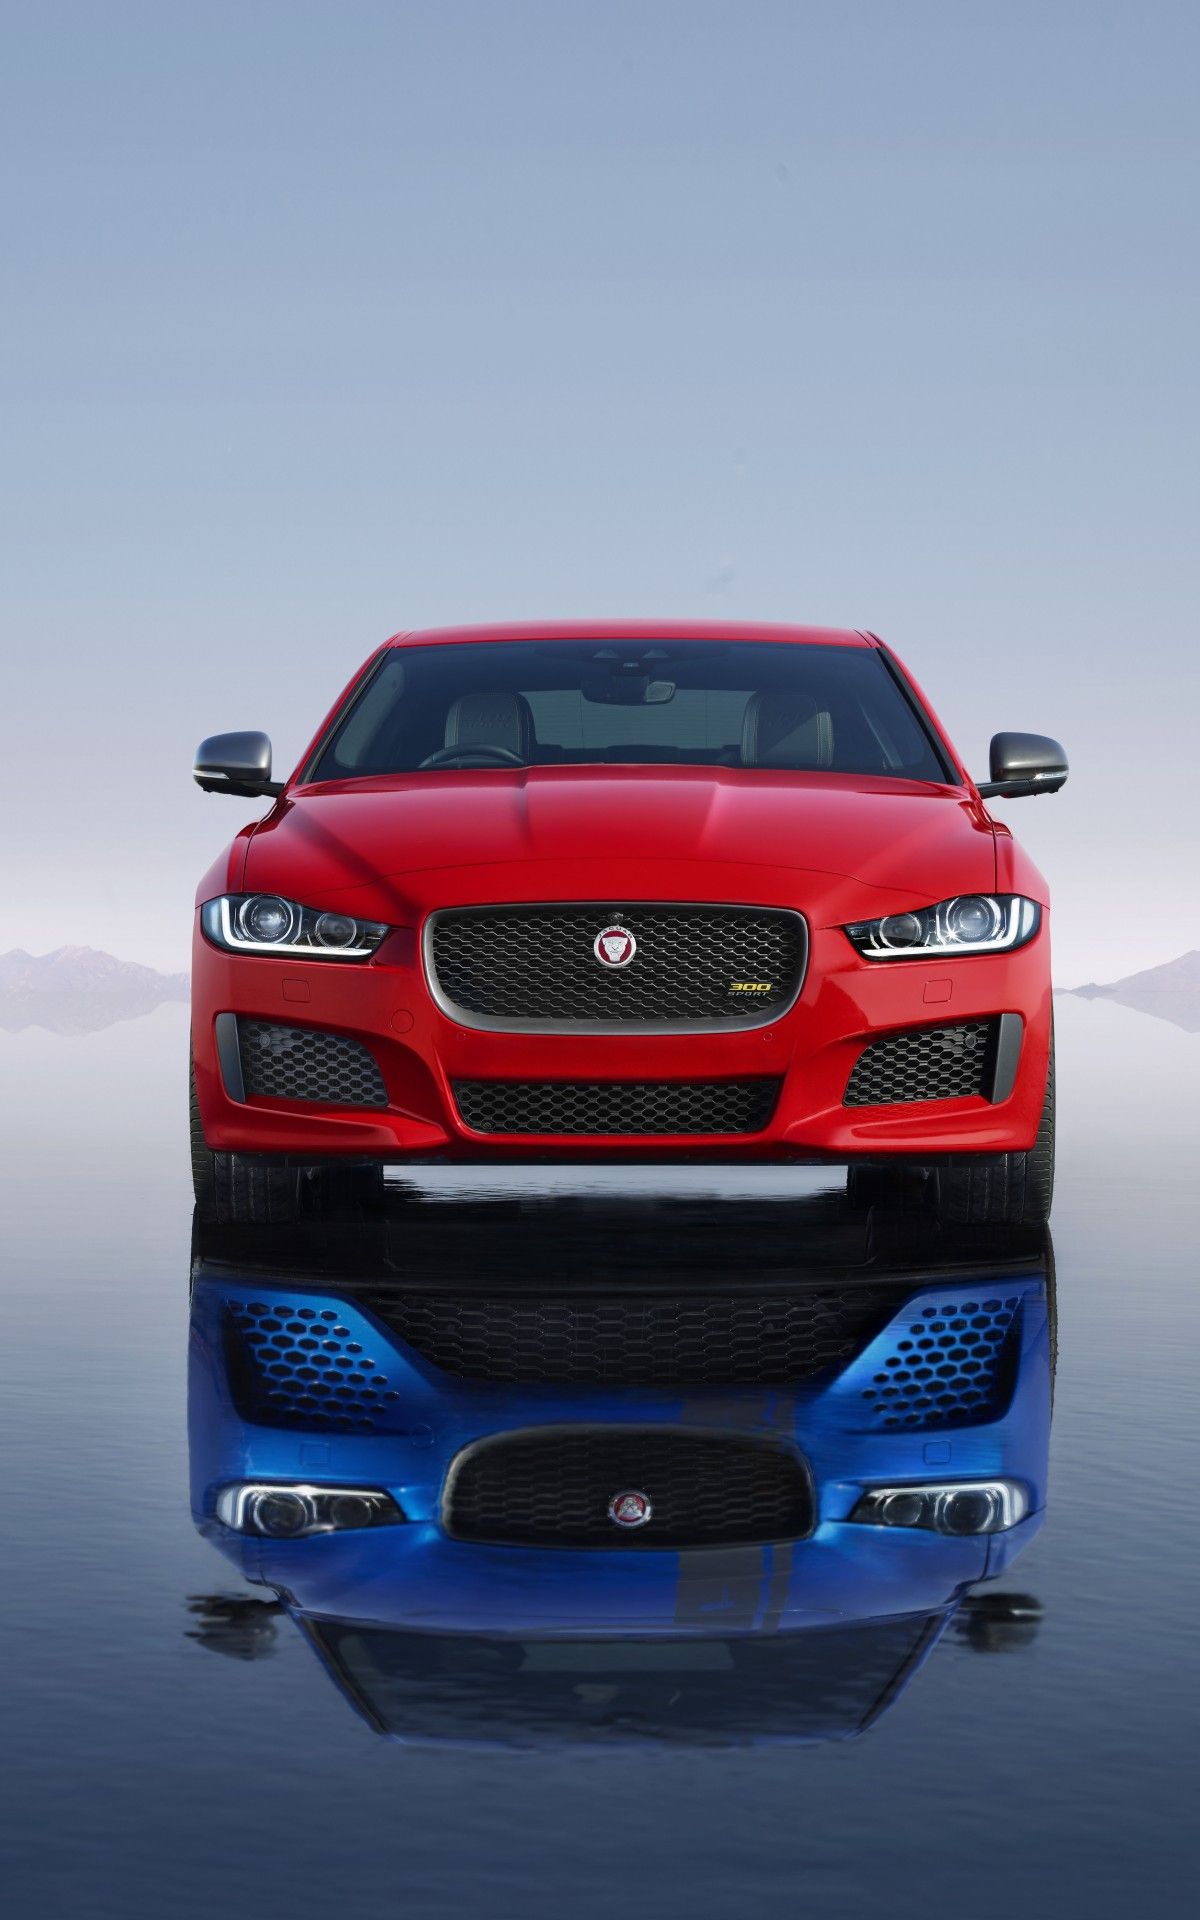 Jaguar Xe 300 Sport, Red, Front View, Reflection, Sport Cars